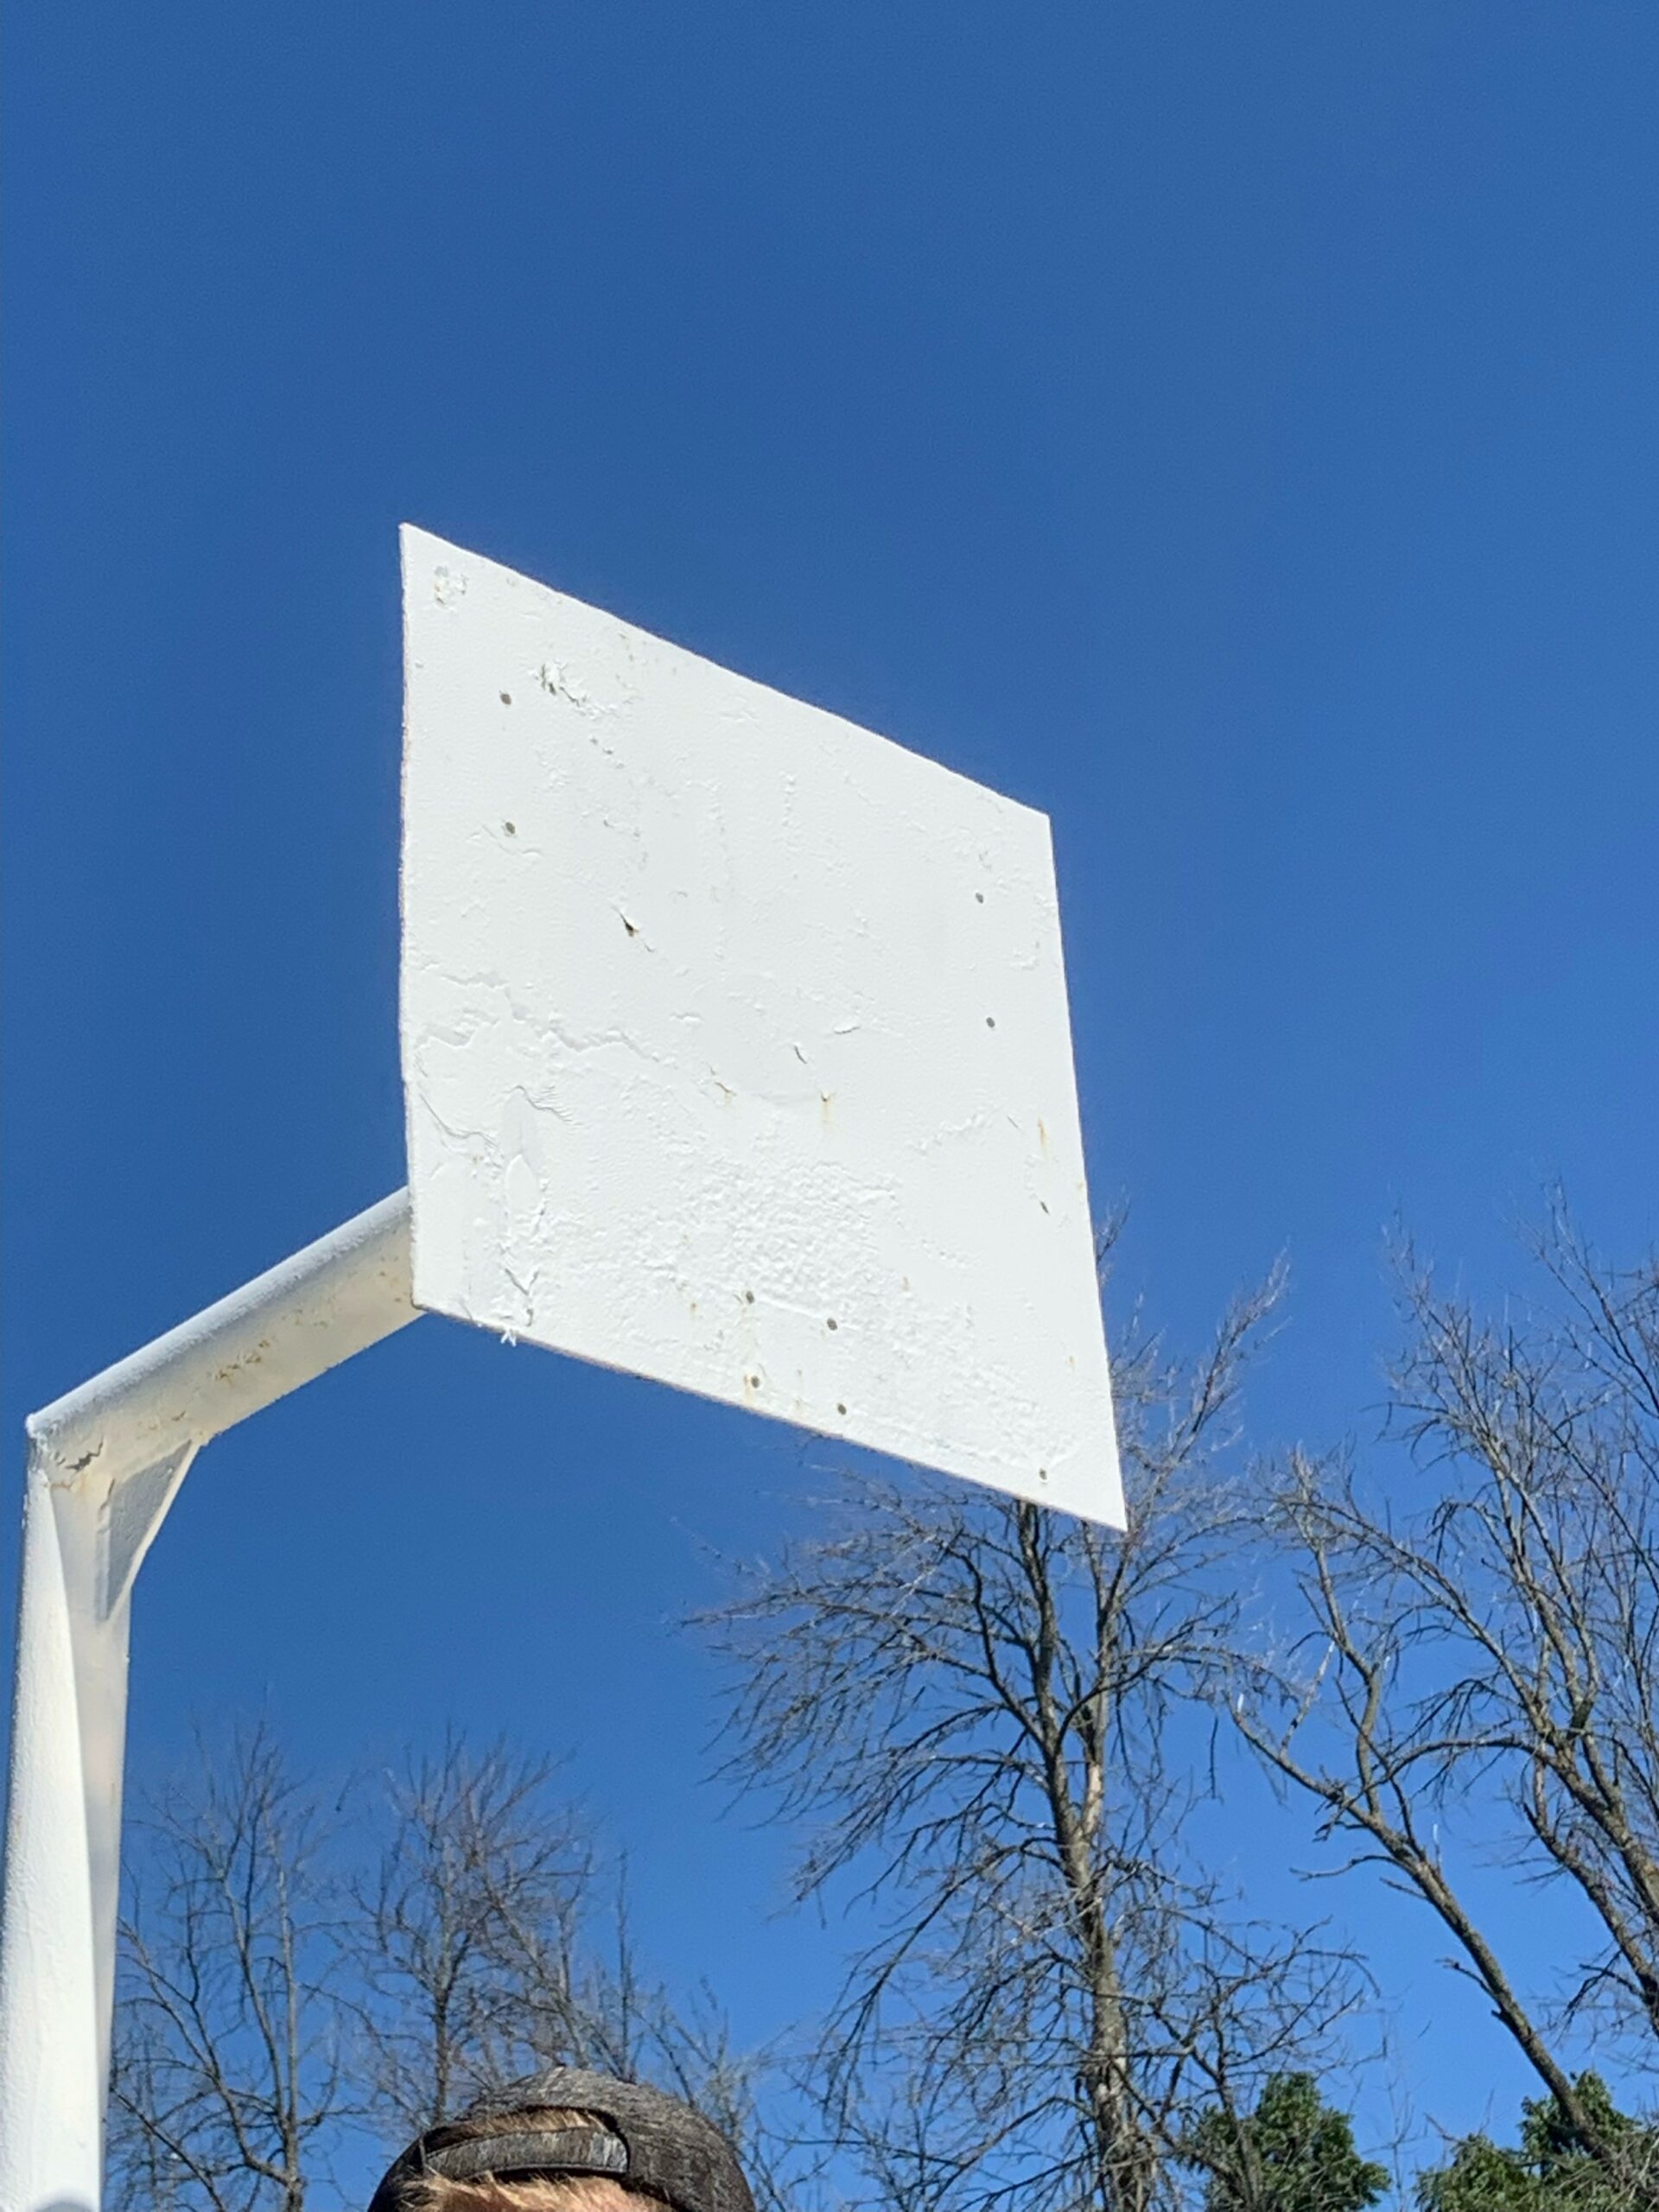 back board for new basketball net at MERC